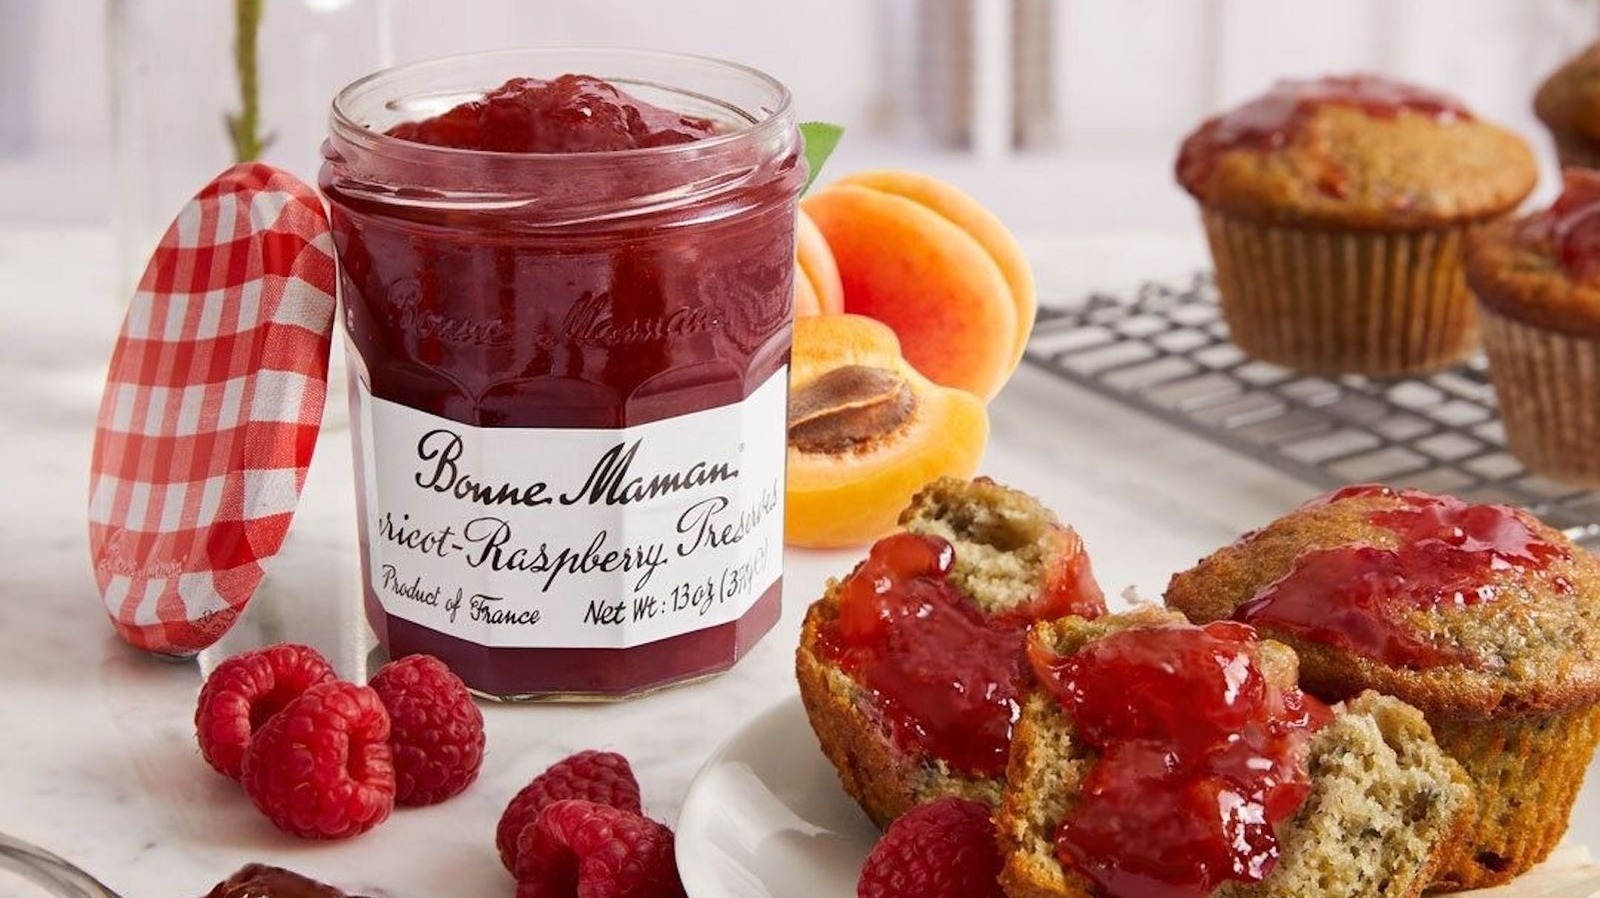 Which Bonne Maman Flavor Is the Best?